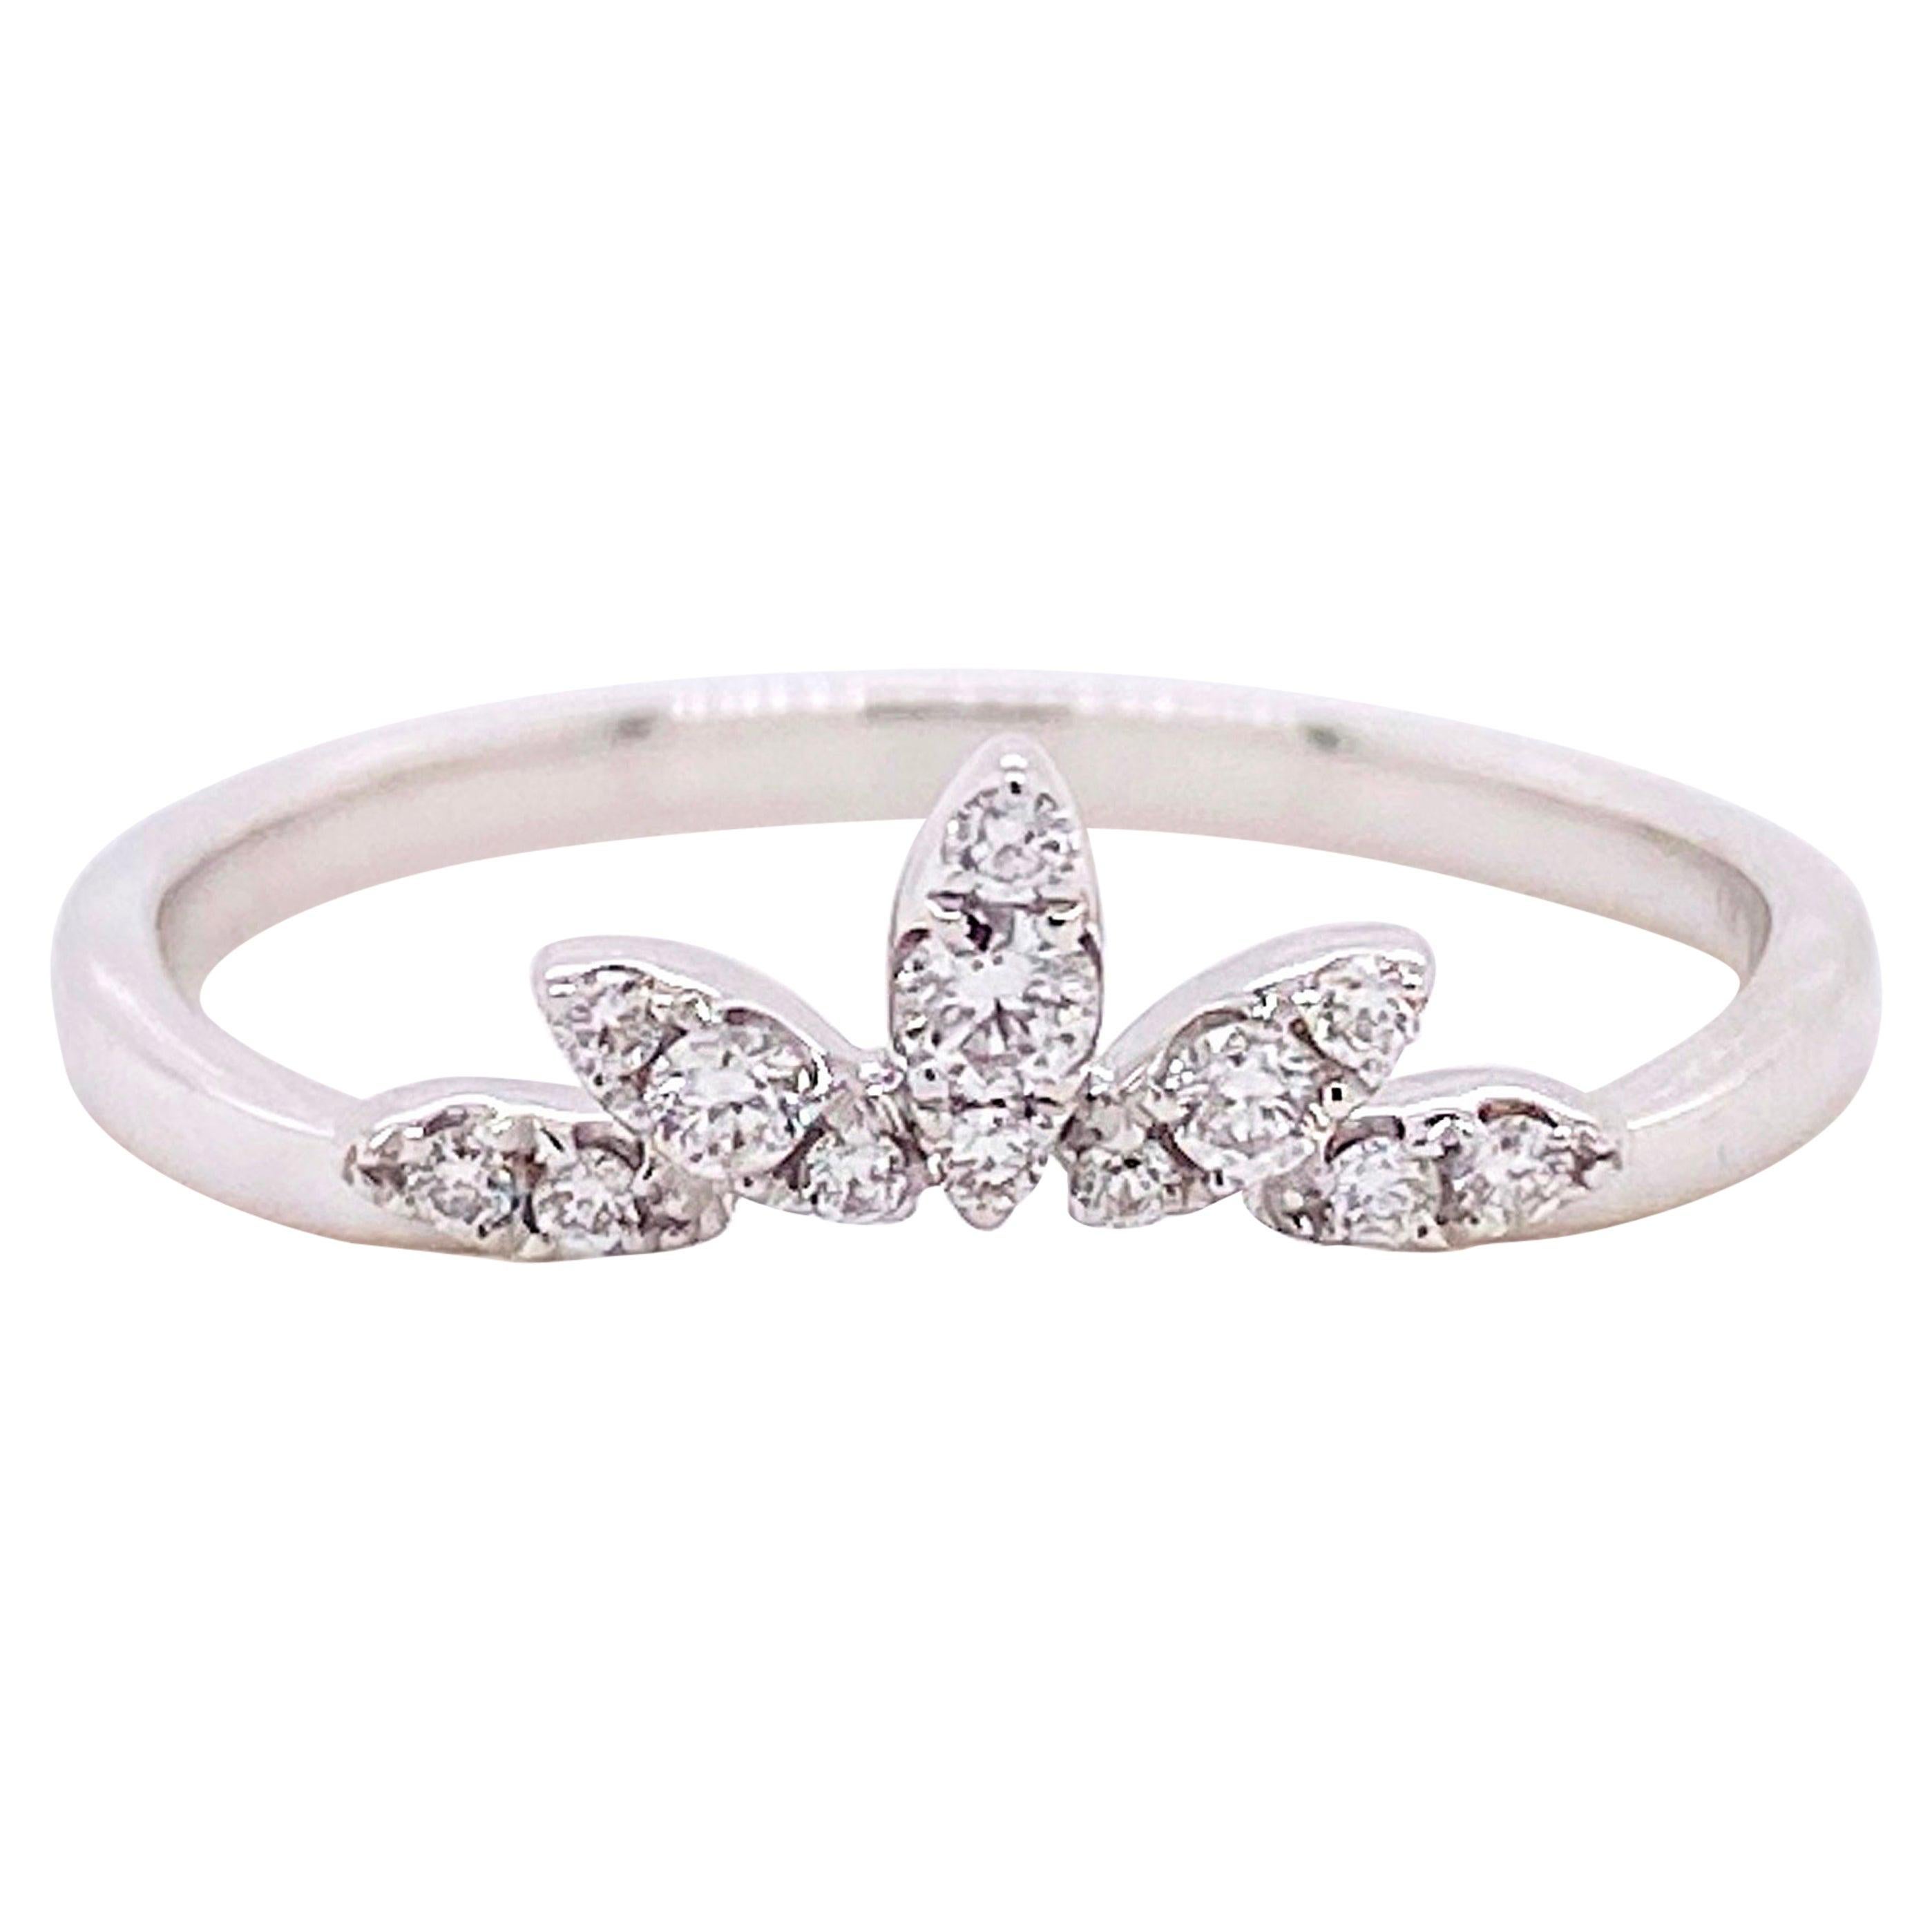 For Sale:  Diamond Crown Ring, 14 Karat White Gold Curved Band, Round, Marquise